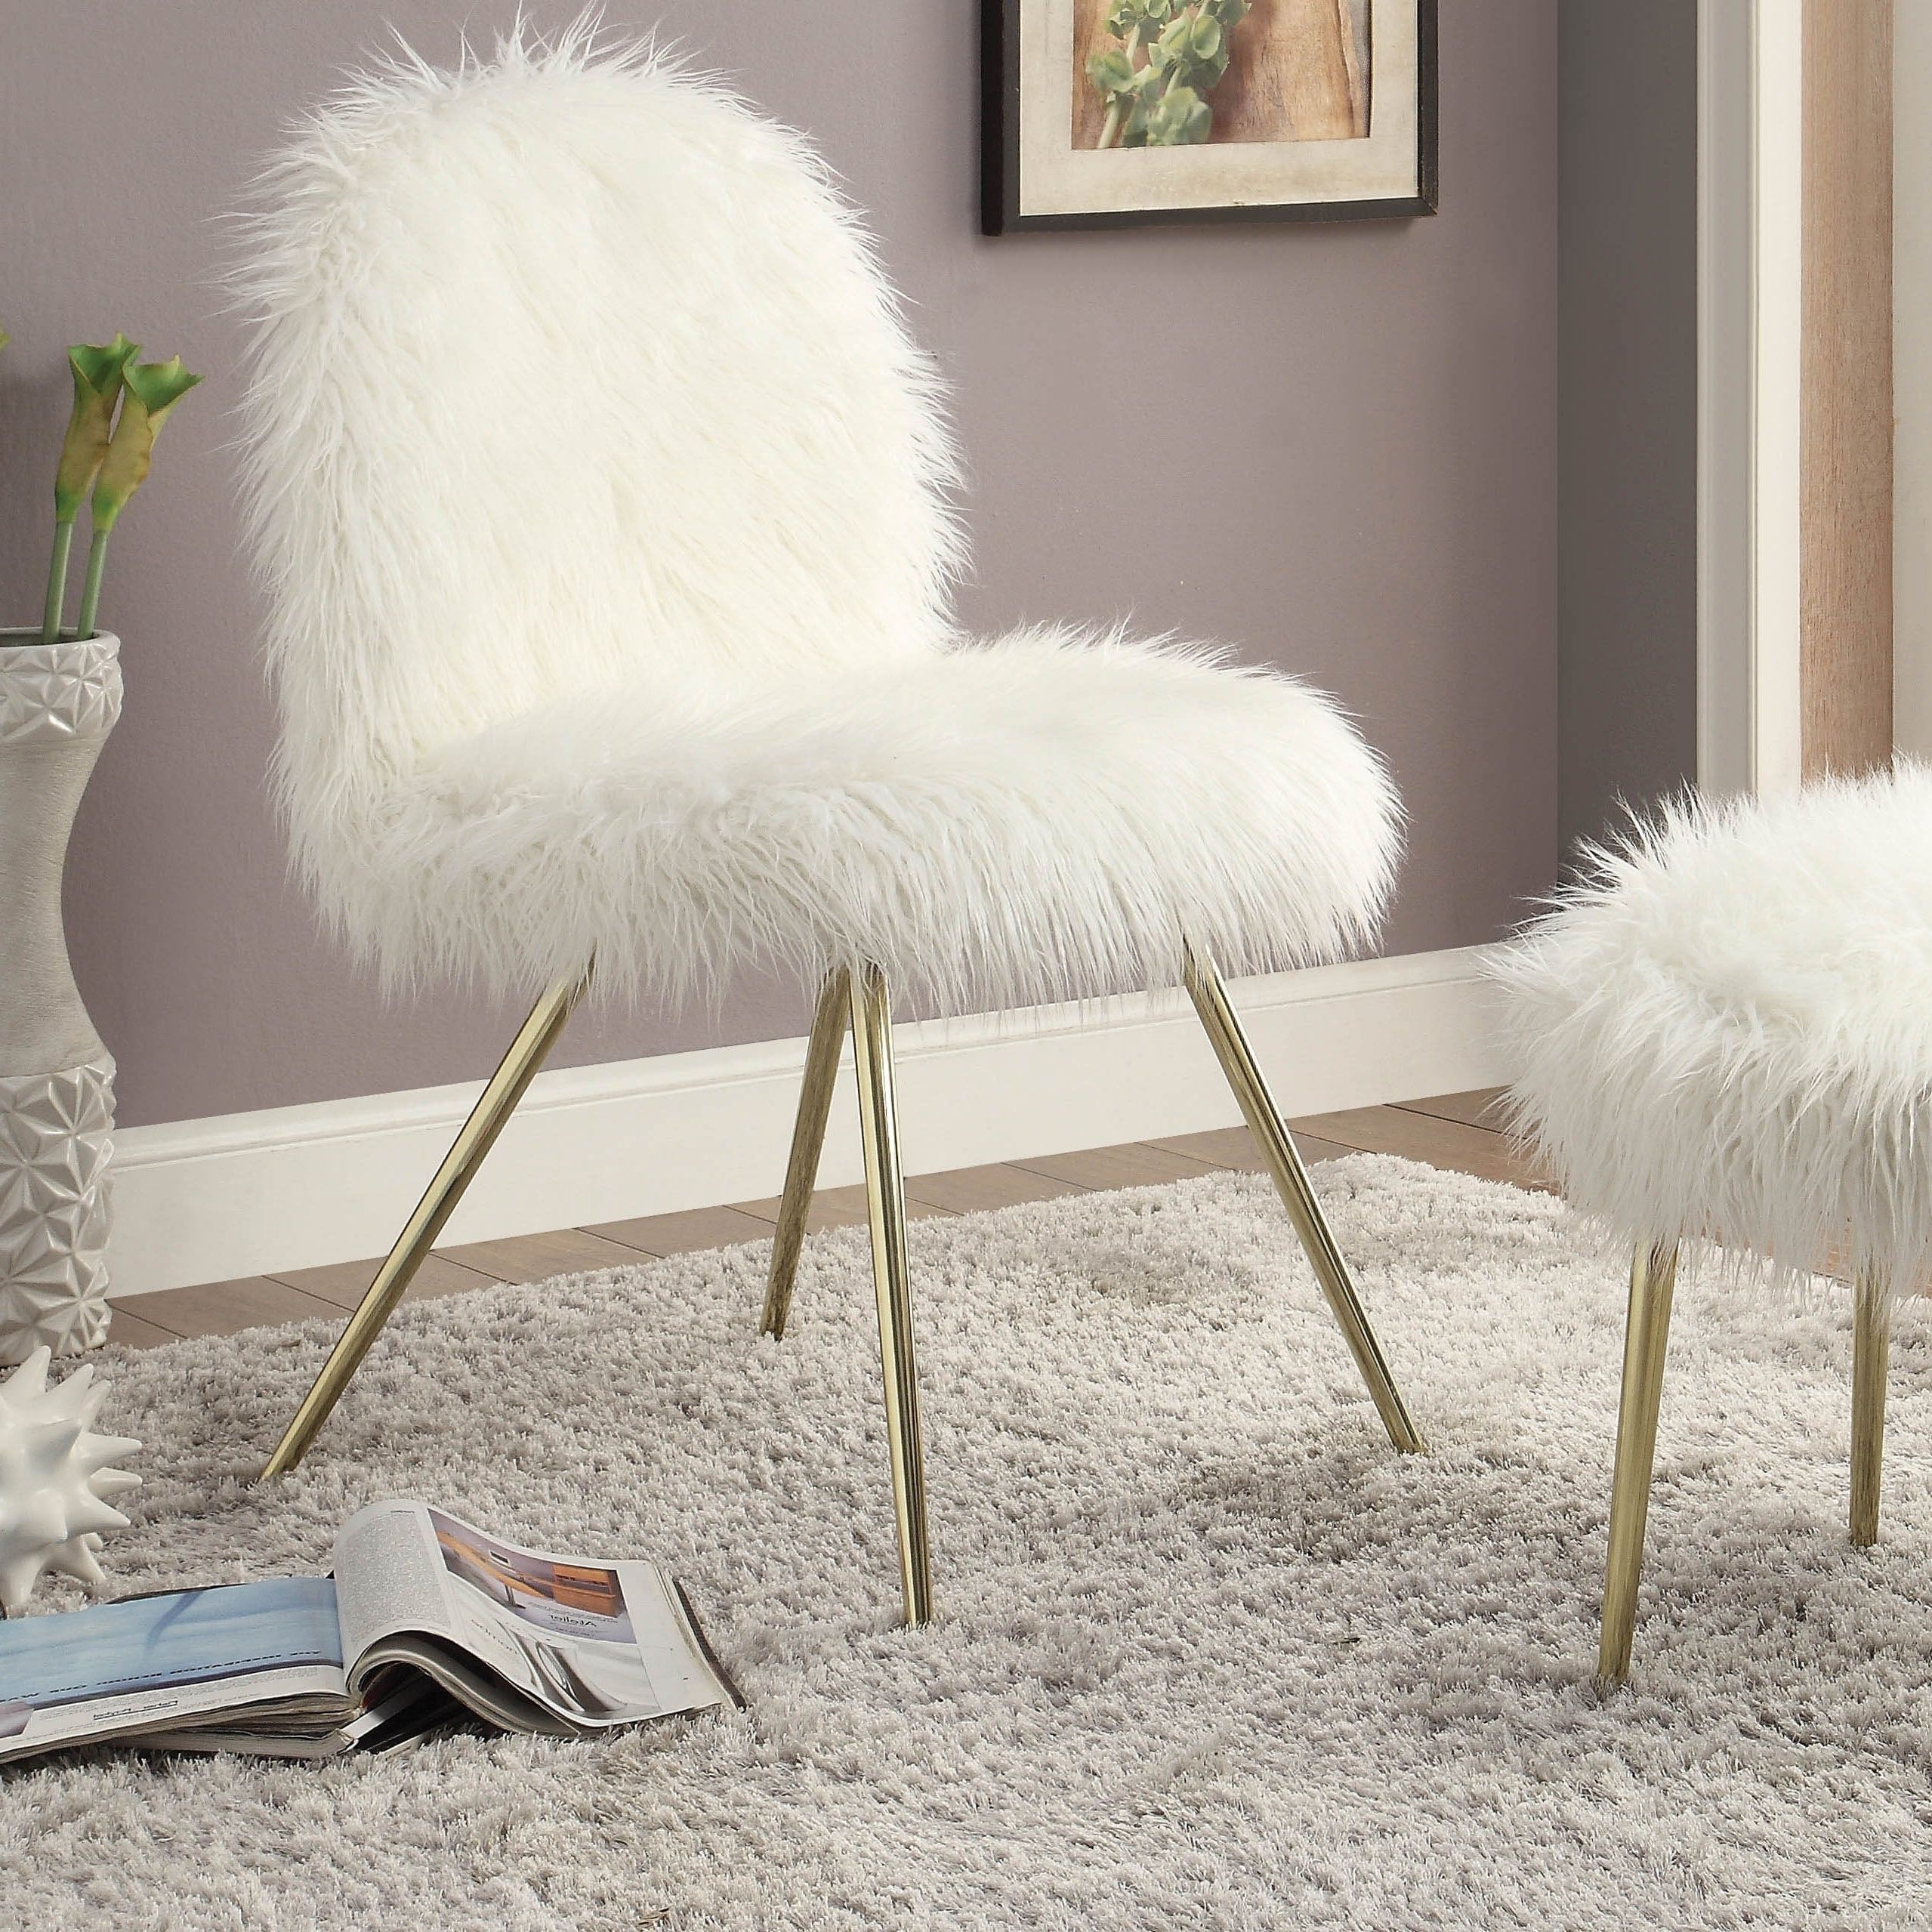 White Faux Fur Round Accent Stools With Storage With Most Popular White Fluffy Chair (View 2 of 10)